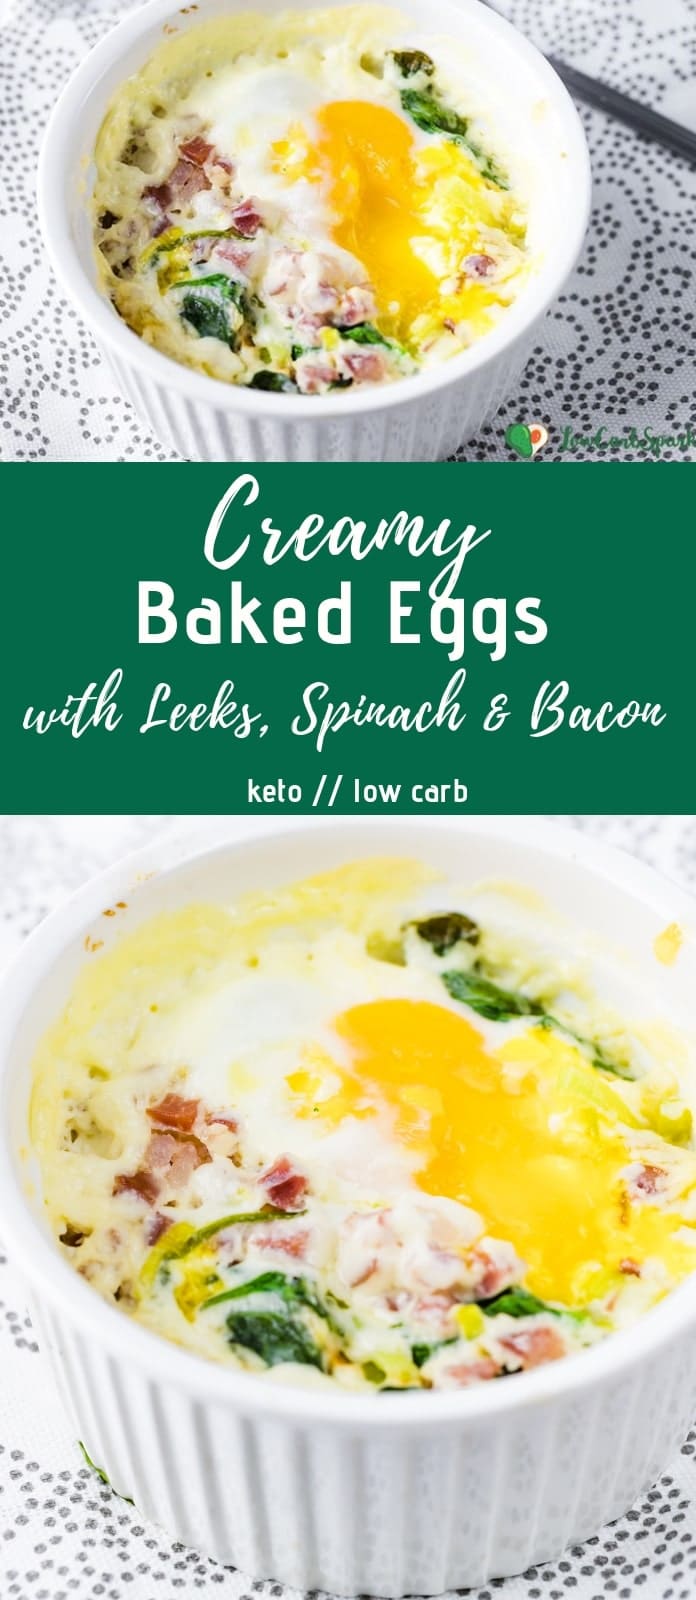 Creamy Baked Eggs with Leeks, Spinach and Bacon